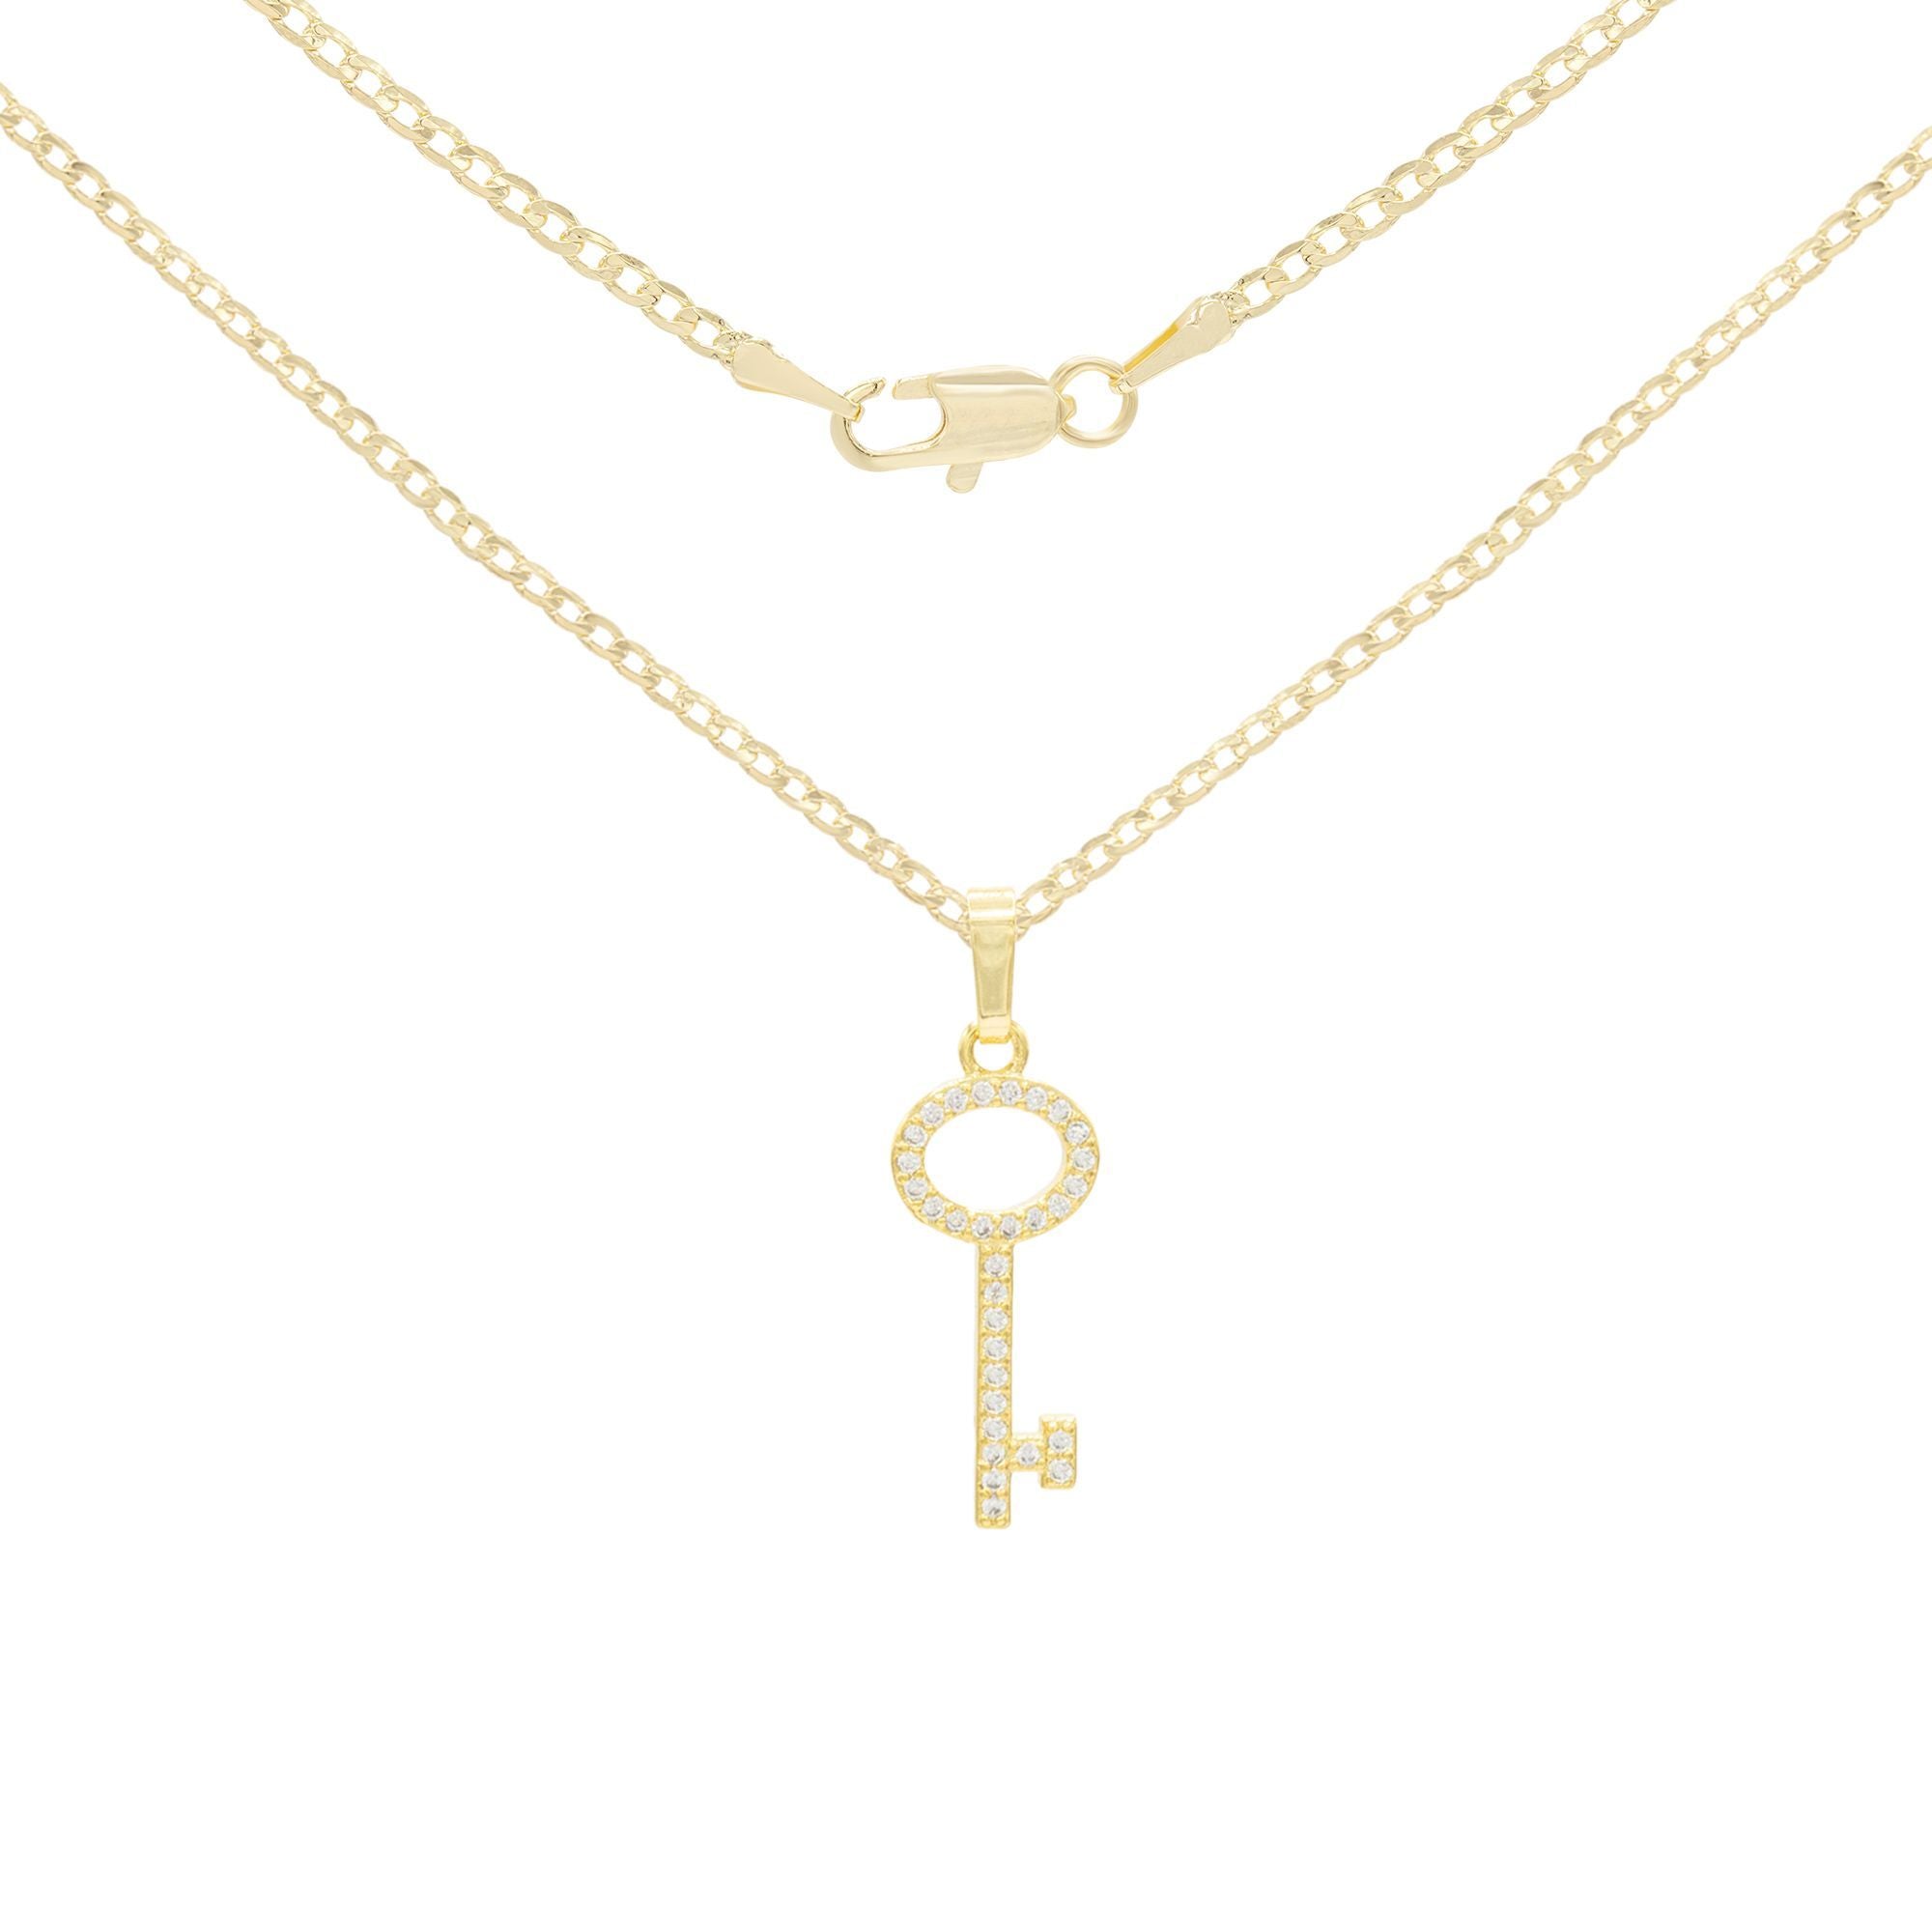 Key Cubic Zirconia Pendant With Necklace Set 14K Gold Filled